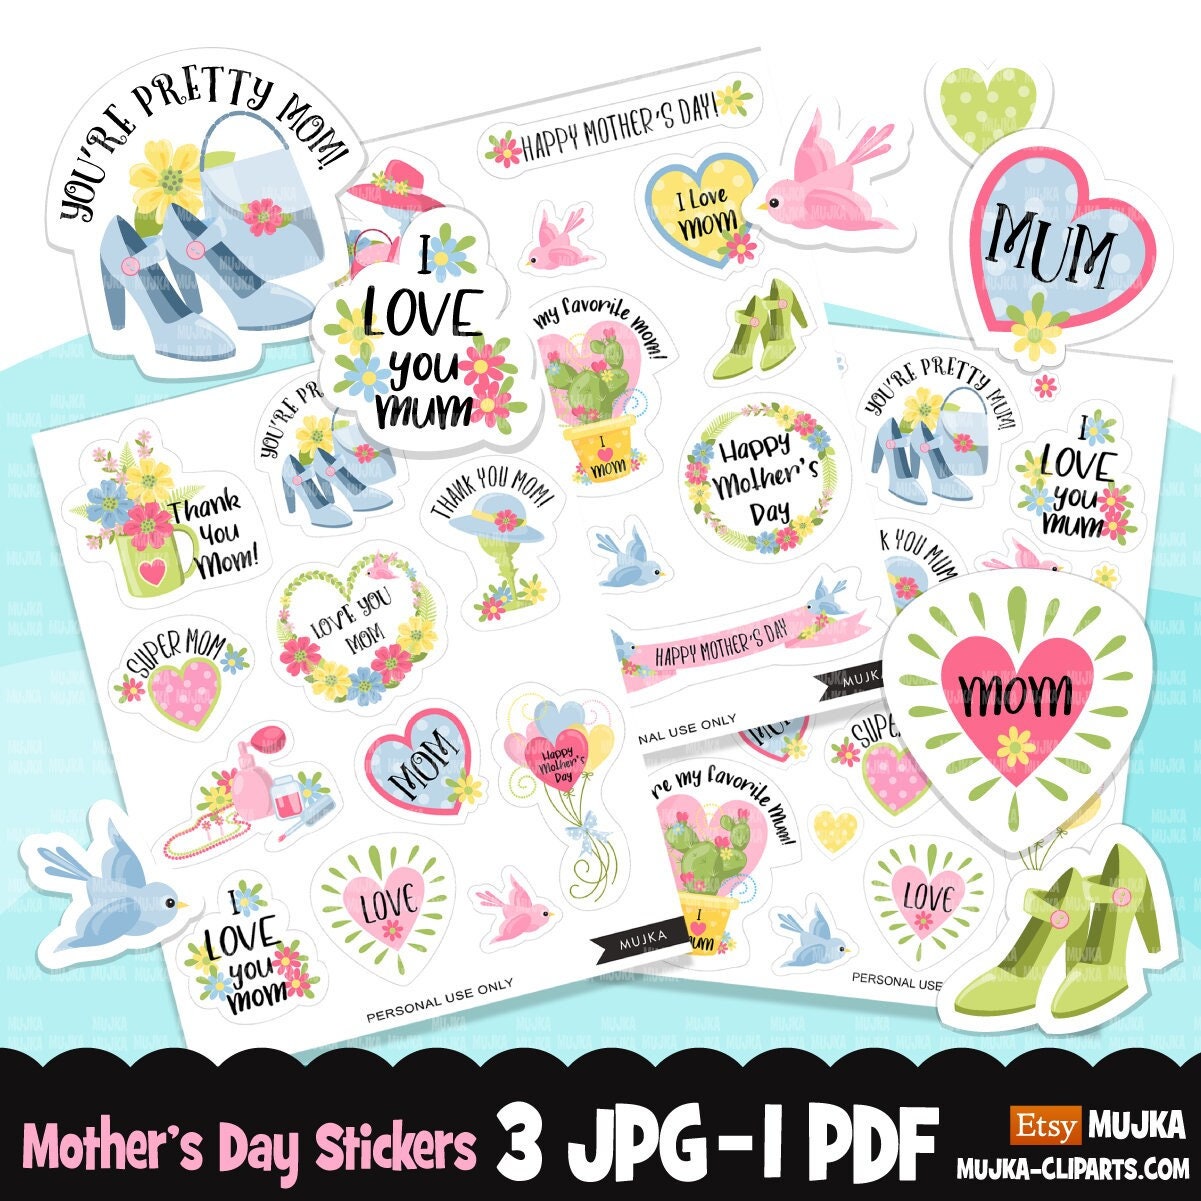 Mom stickers, printable stickers, mothers day stickers, mothers day print and cut, mom clipart, mothers day png, mom png, digital download